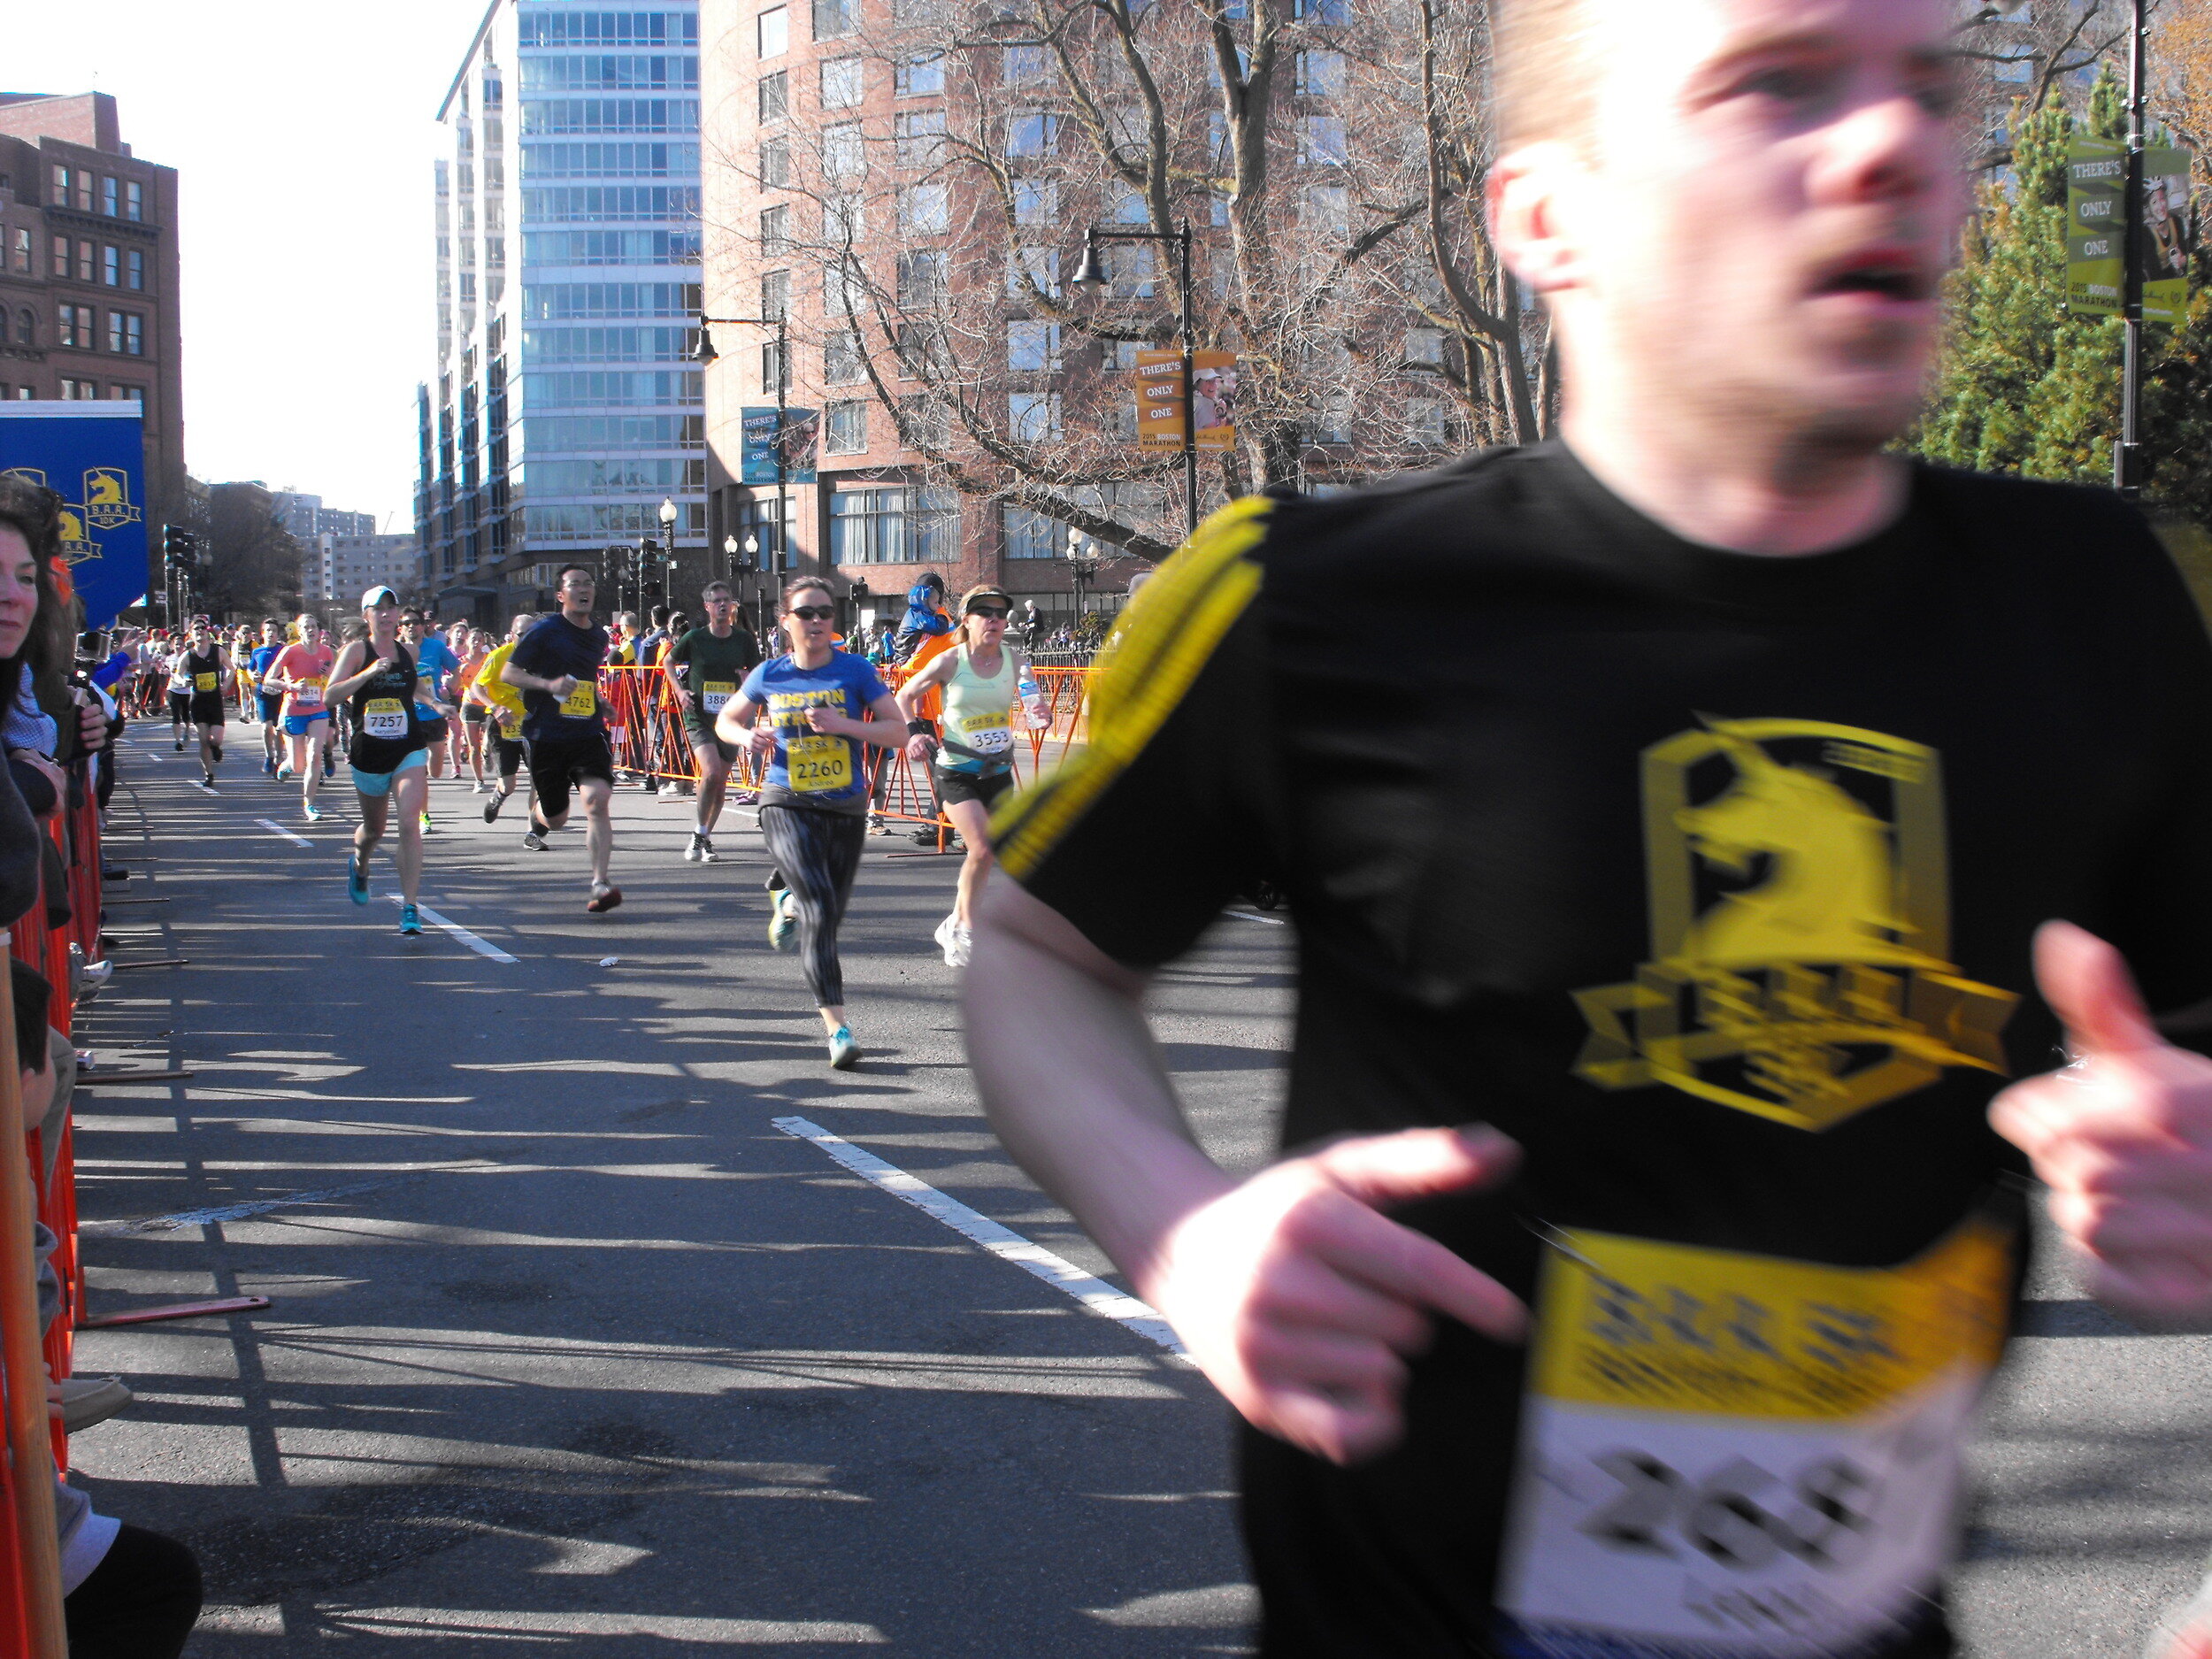  Boston. April 18, 2015. At the three mile mark, the second wave of runners push through the final leg of the BAA 5k. (Photo by: Gina Kim/BU News Service) 